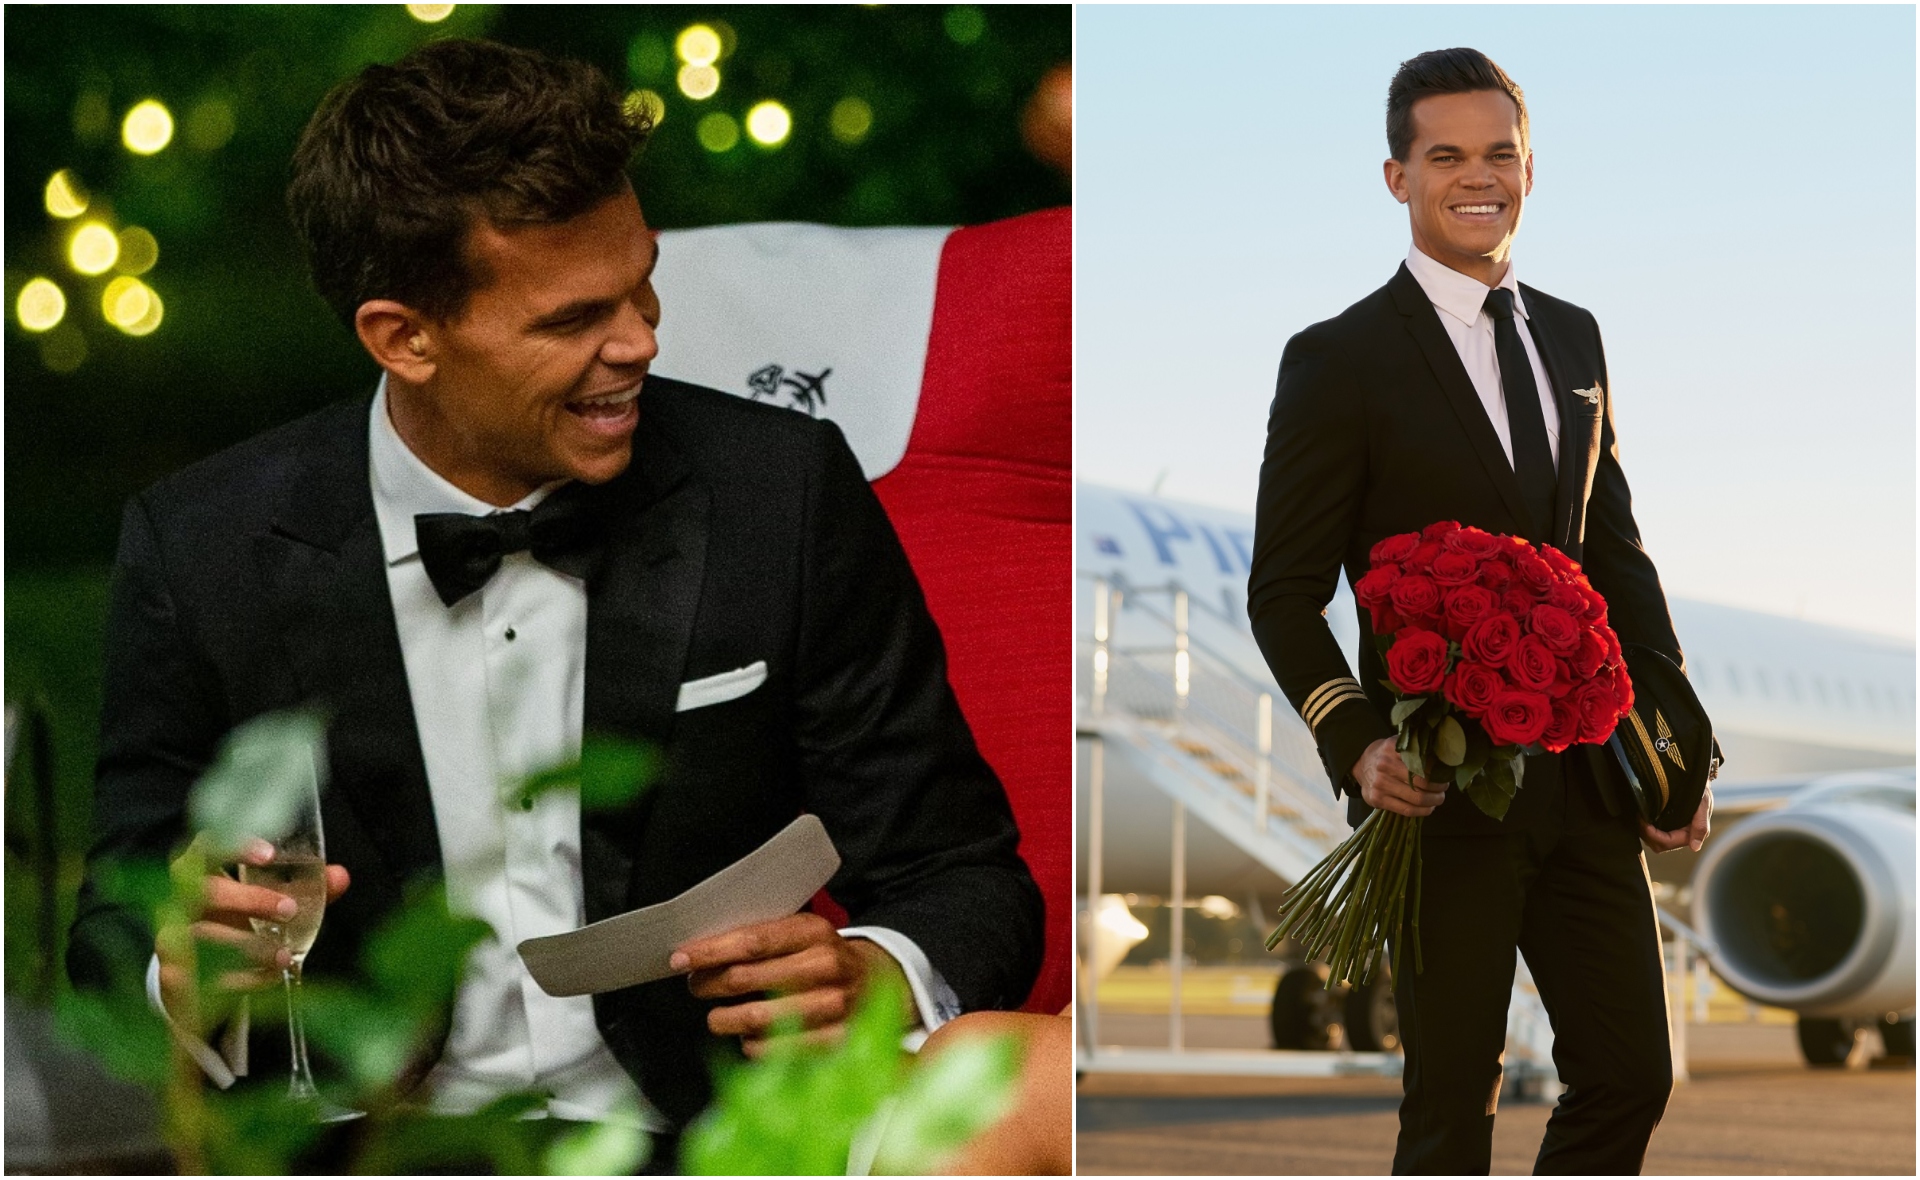 EXCLUSIVE: Bachelor Jimmy Nicholson reveals he and his winner want to start a family within the next five years